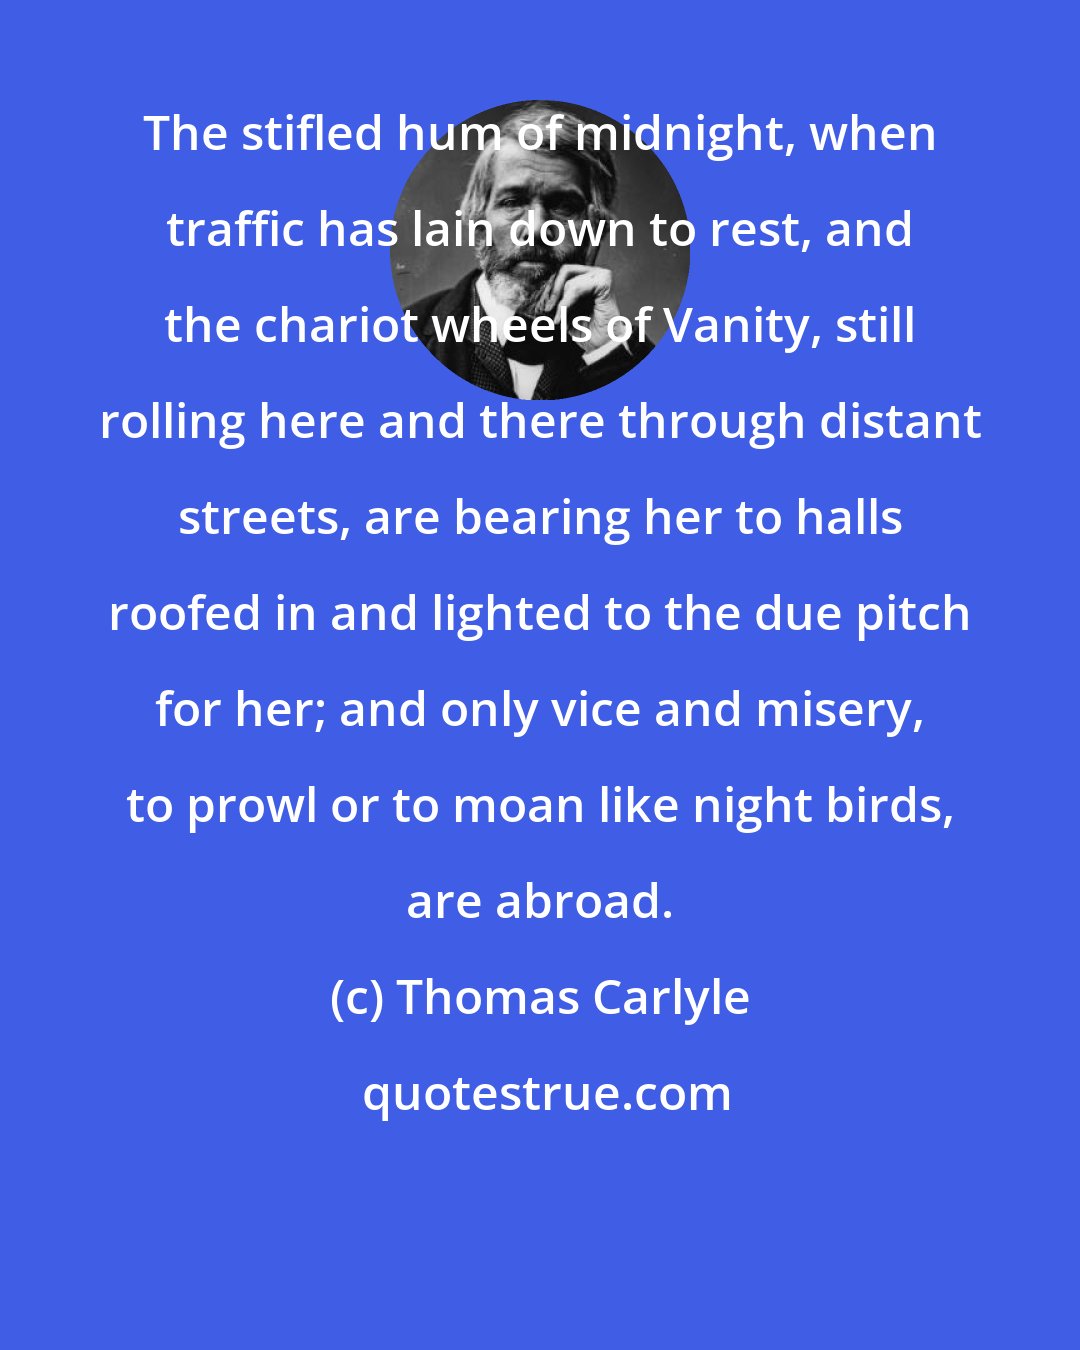 Thomas Carlyle: The stifled hum of midnight, when traffic has lain down to rest, and the chariot wheels of Vanity, still rolling here and there through distant streets, are bearing her to halls roofed in and lighted to the due pitch for her; and only vice and misery, to prowl or to moan like night birds, are abroad.